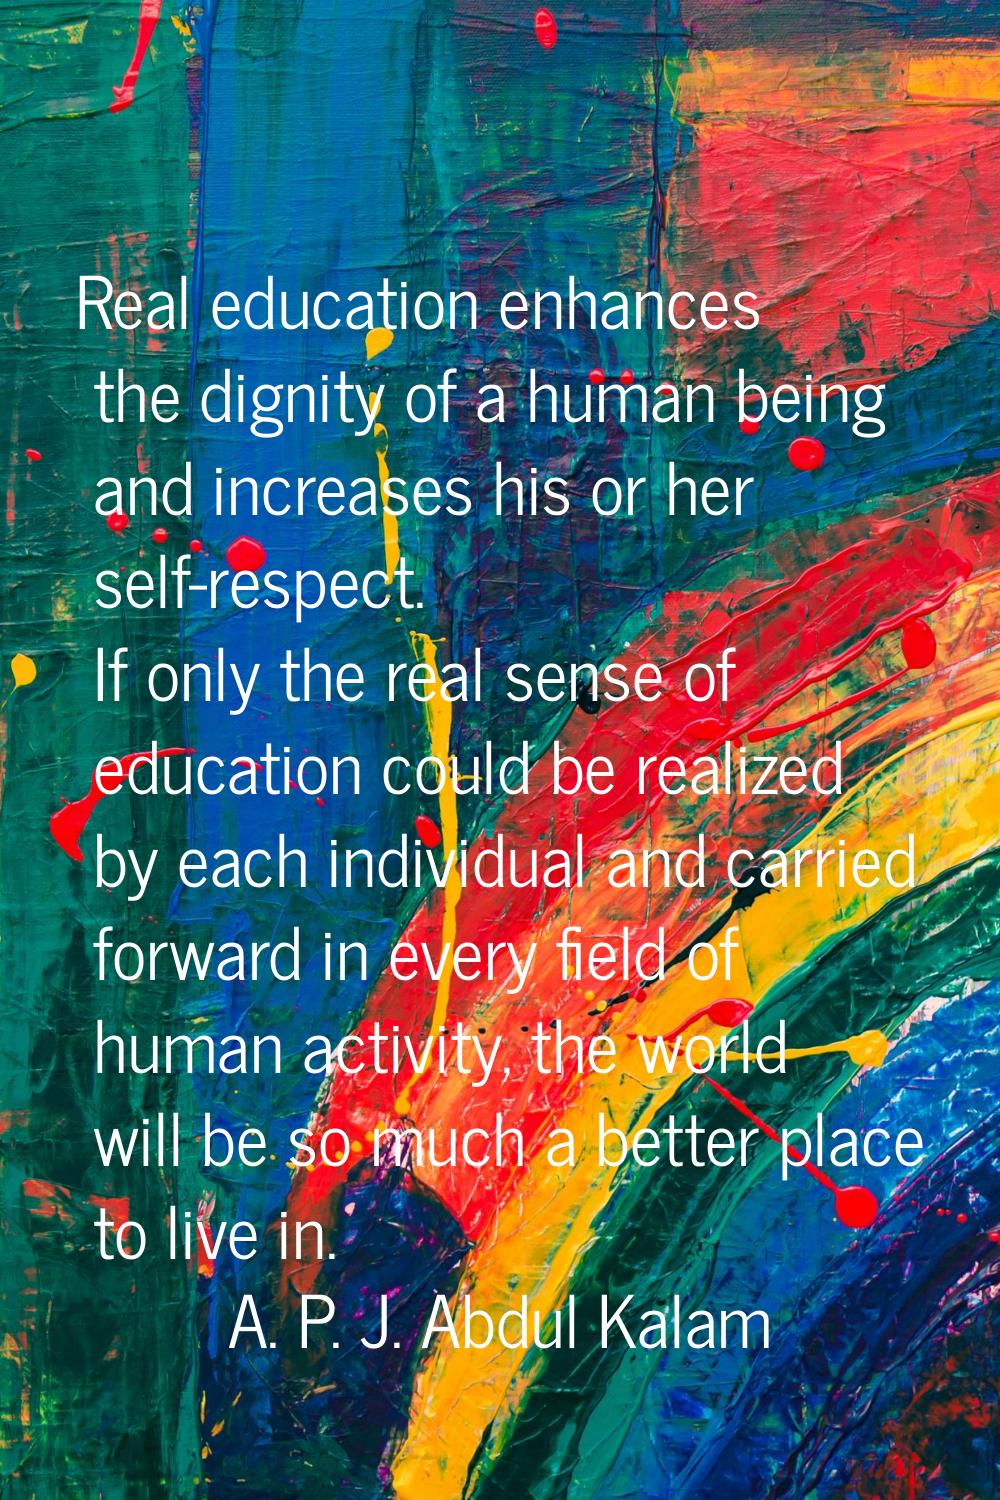 Real education enhances the dignity of a human being and increases his or her self-respect. If only